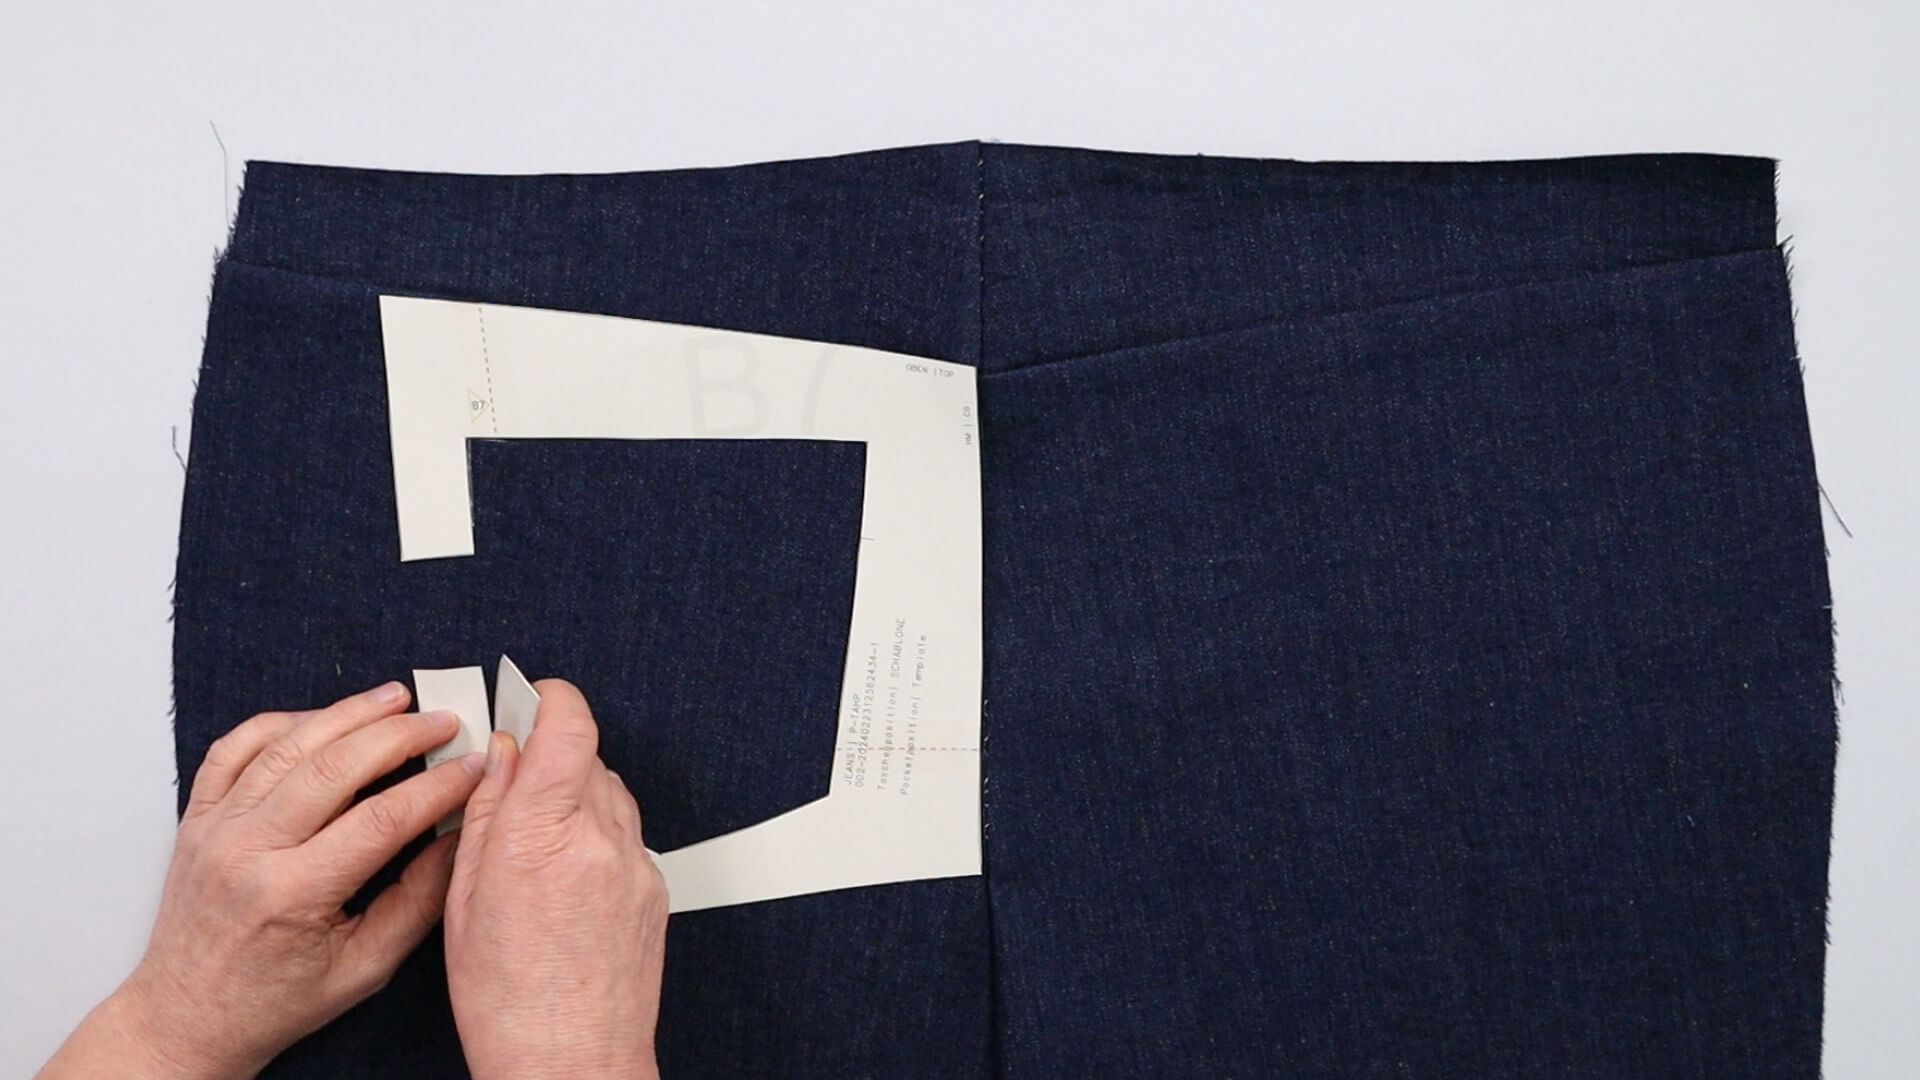 smartPATTERN sewing instructions for preparing a pair of jeans for fitting - mark the left rear pocket position